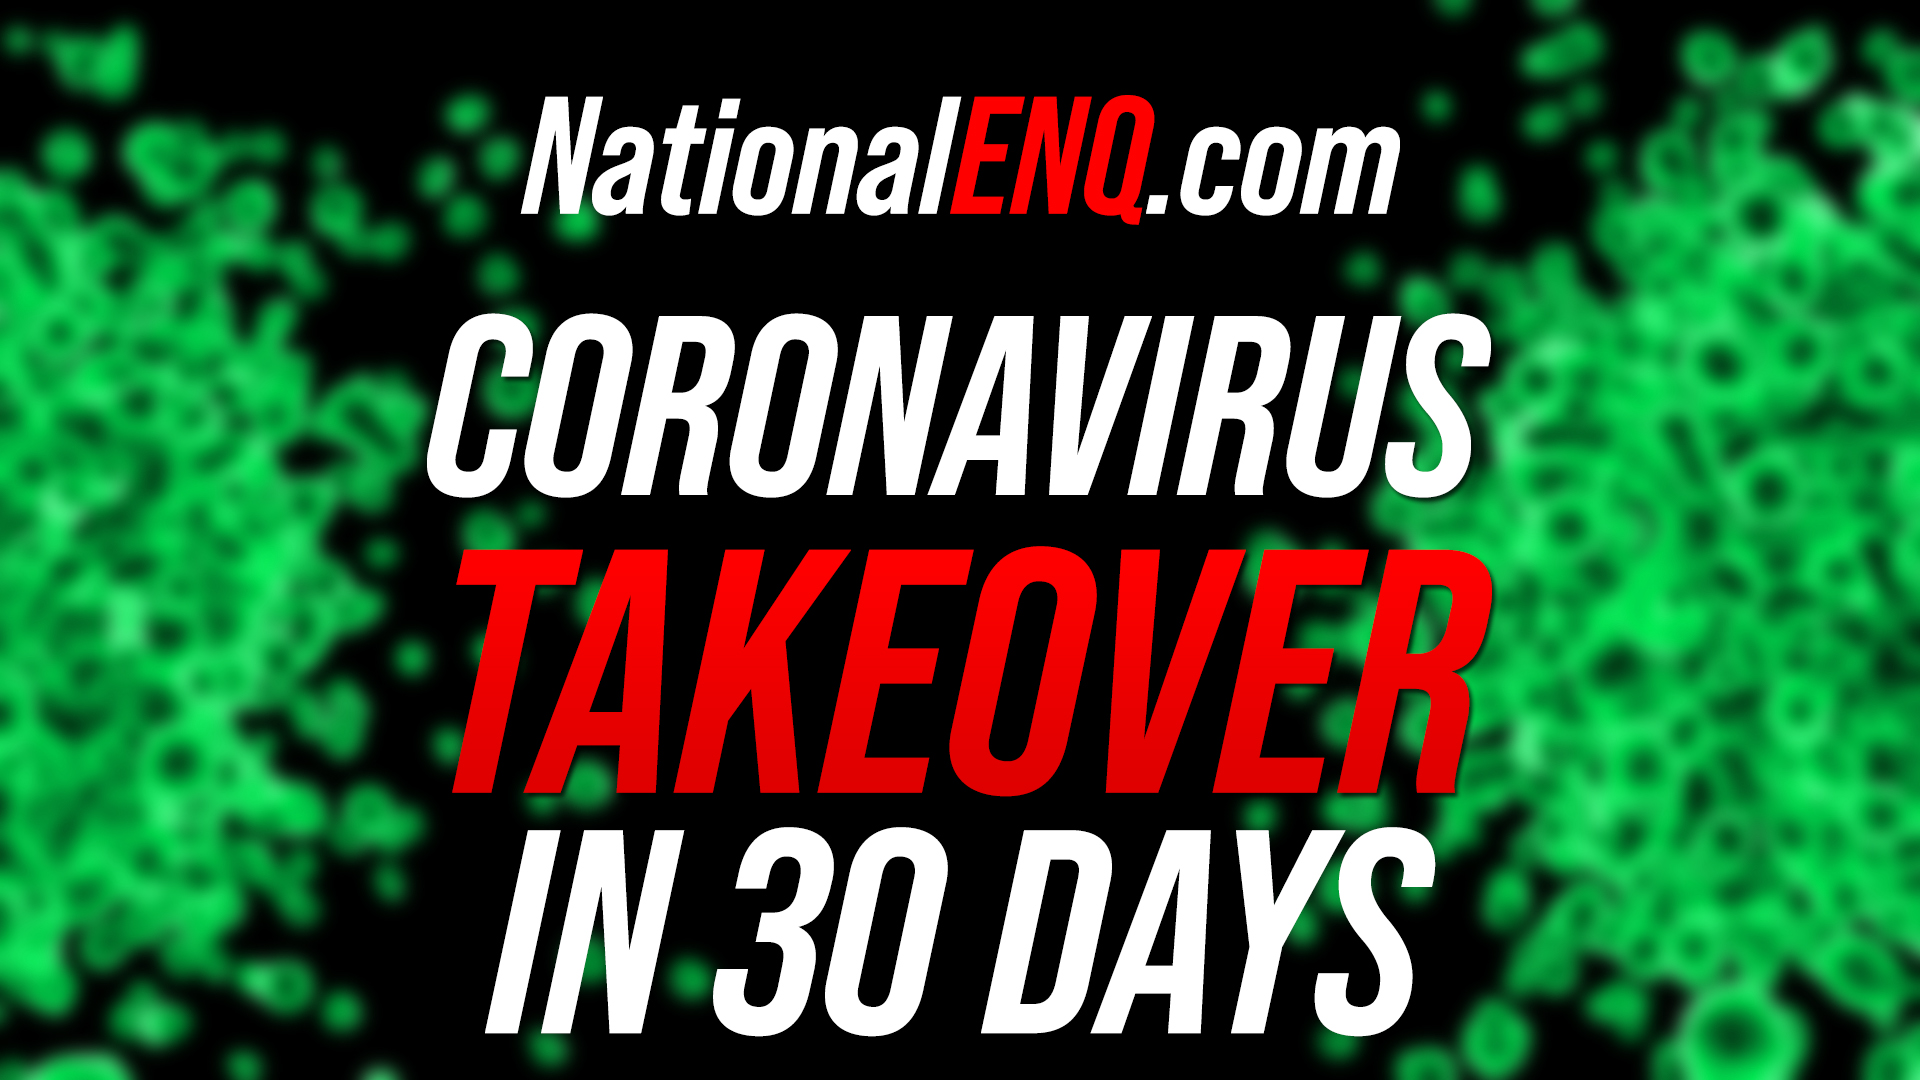 National ENQ Coronavirus News: The U.S. Will End up Worse than Italy If Extreme Measures Aren’t Taken in 30 Days